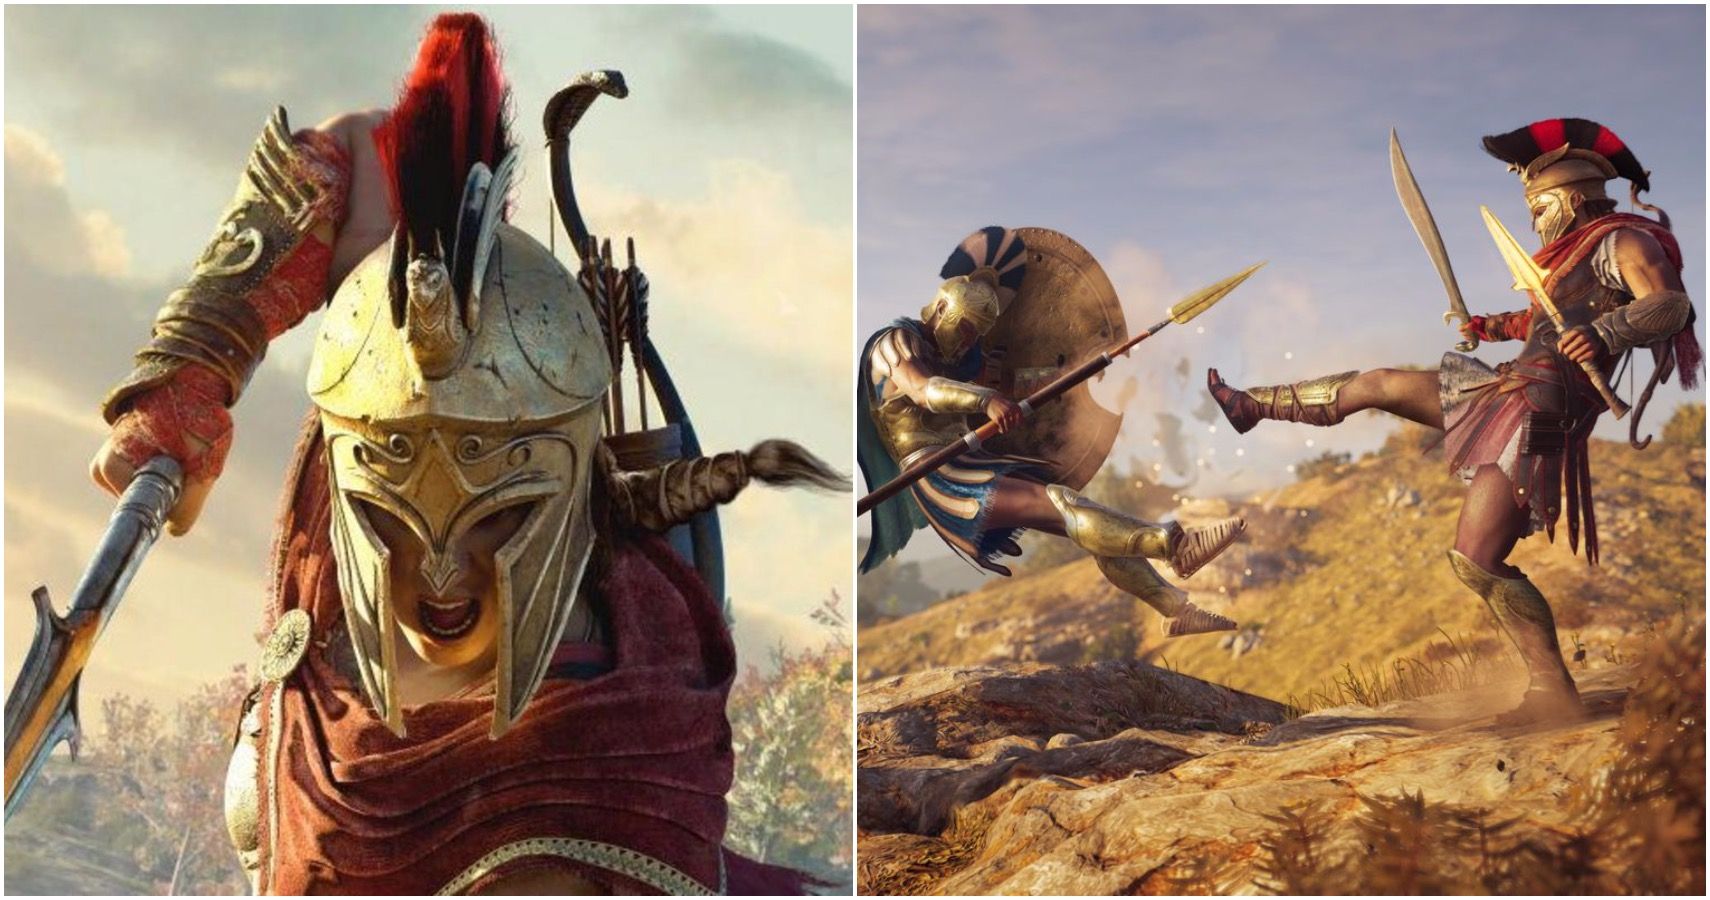 Assassins Creed Odyssey review | PC Gamer